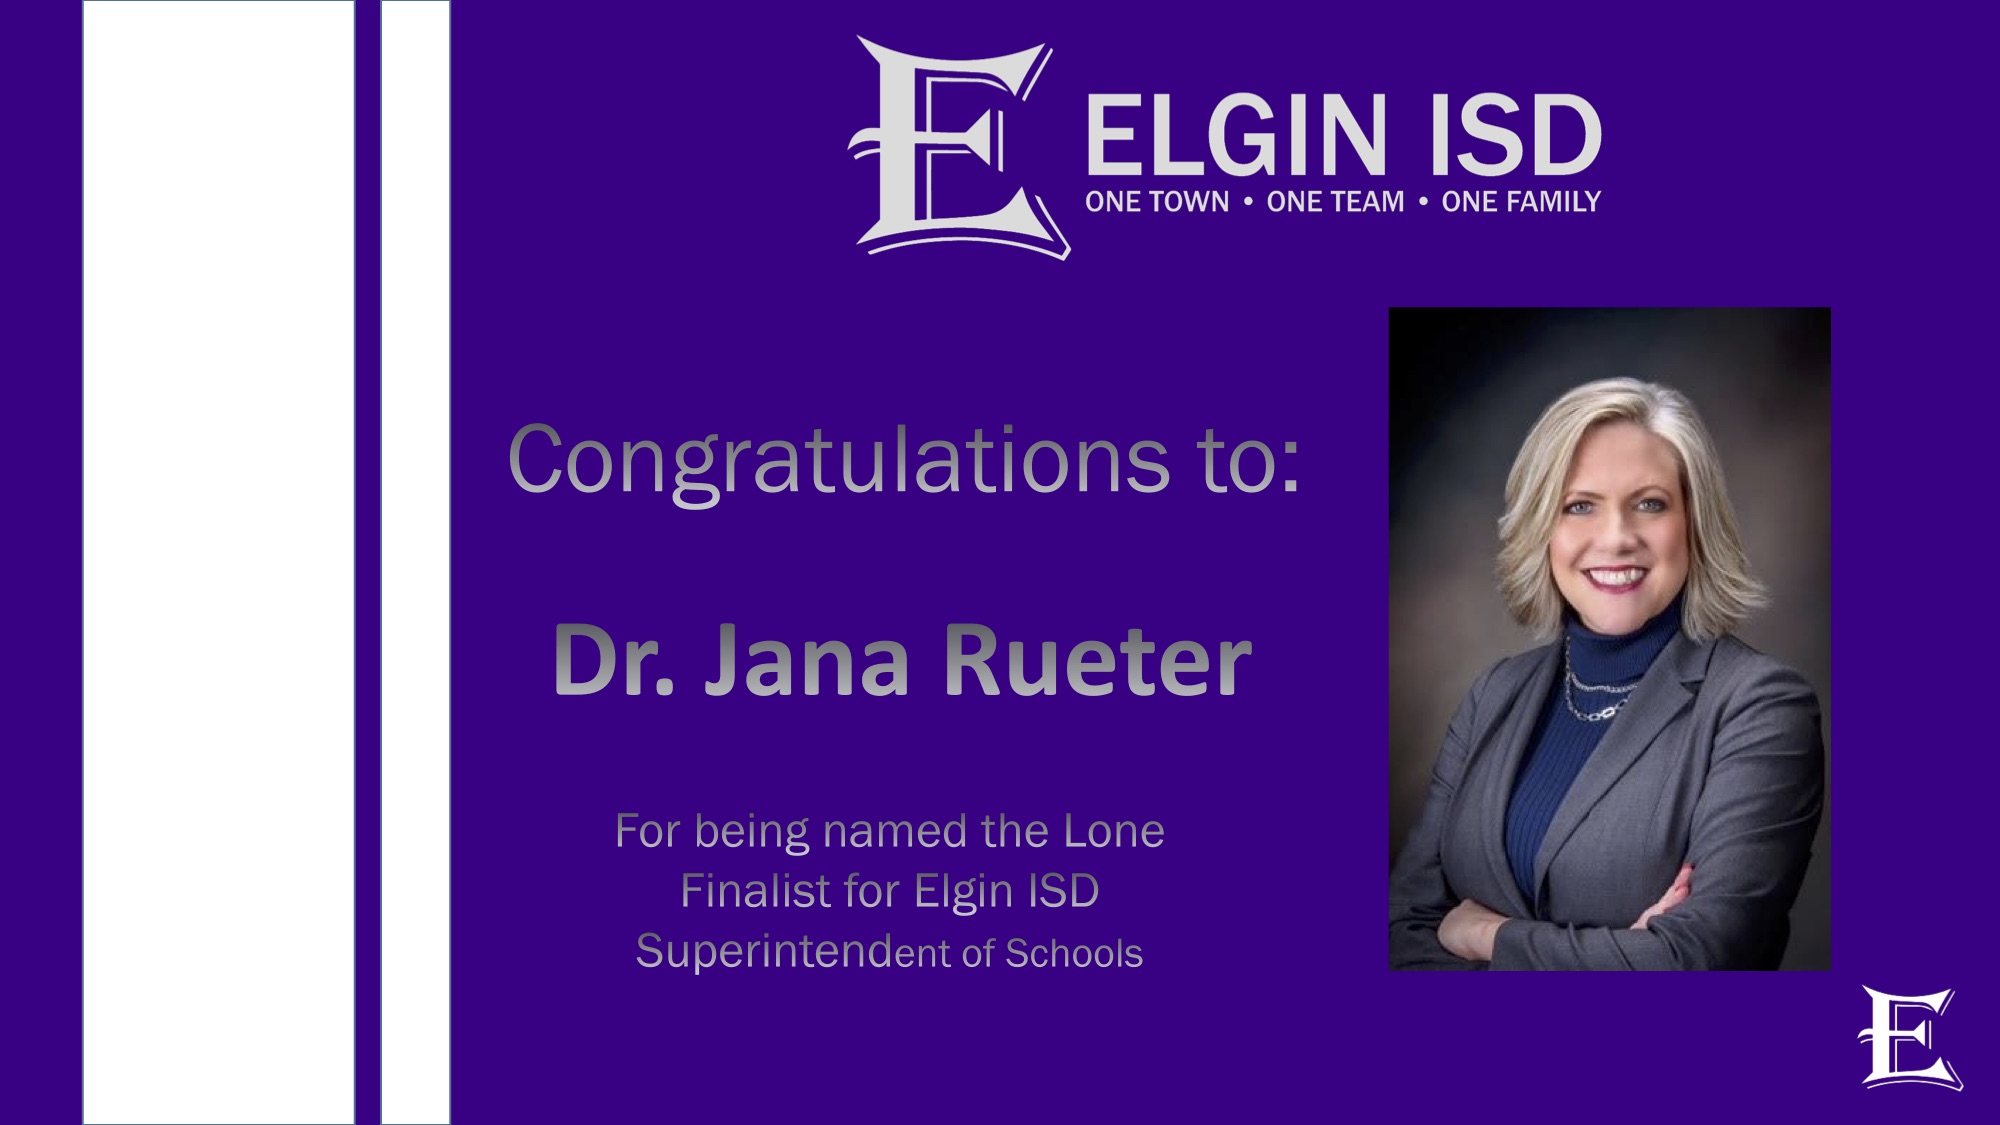 Elgin ISD board announces lone finalist for superintendent position